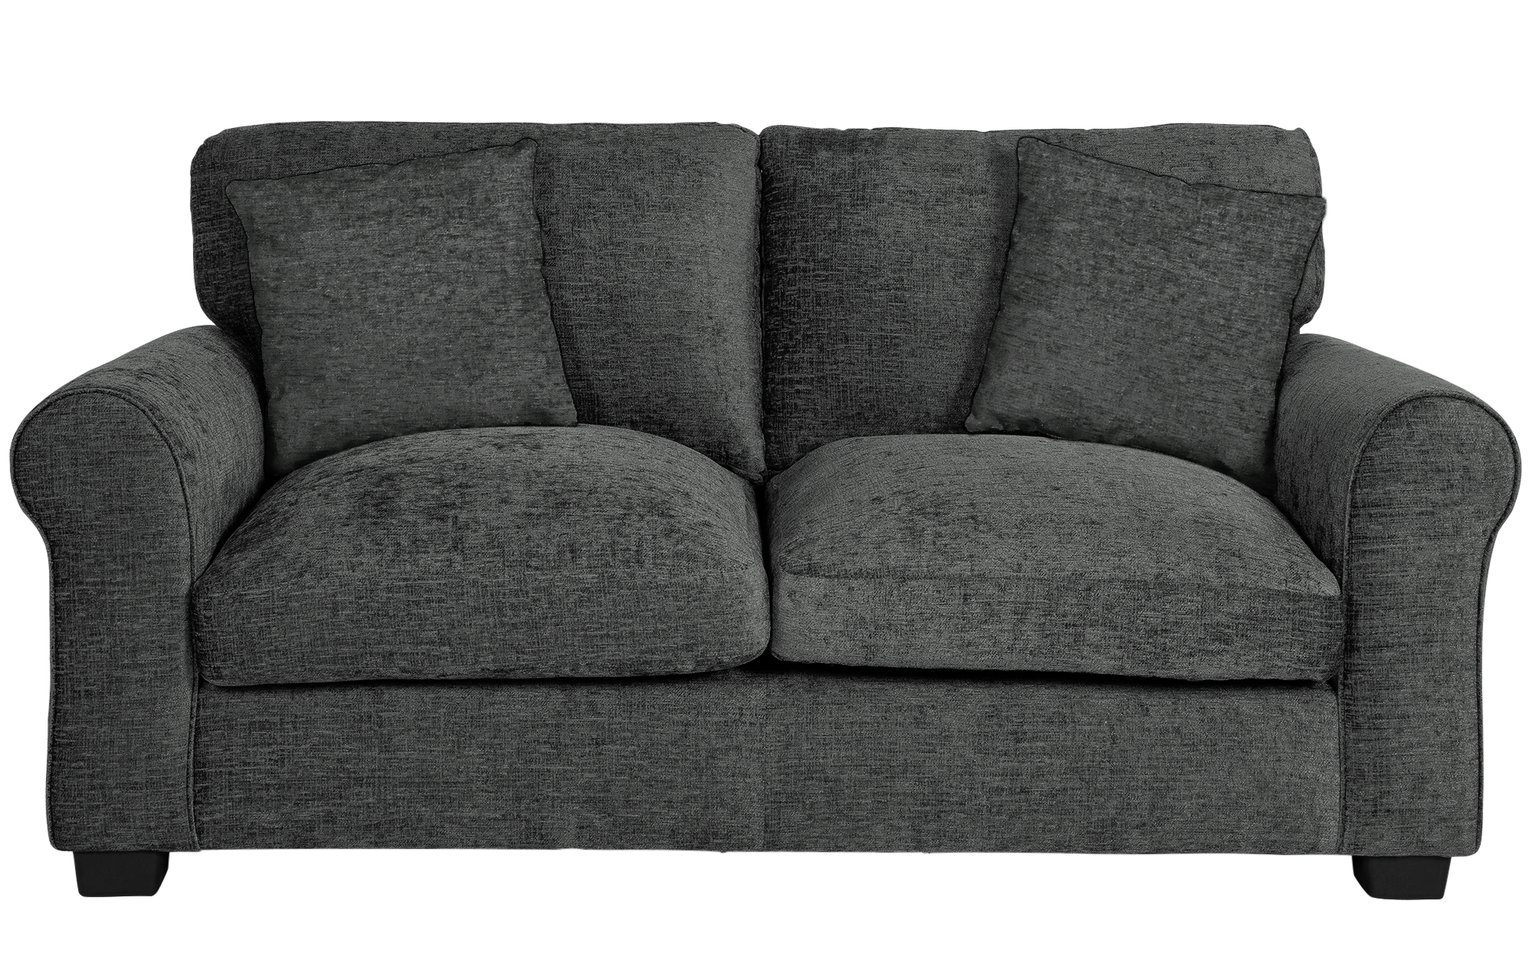 Argos Home Tammy 2 Seater Fabric Sofa - Charcoal.